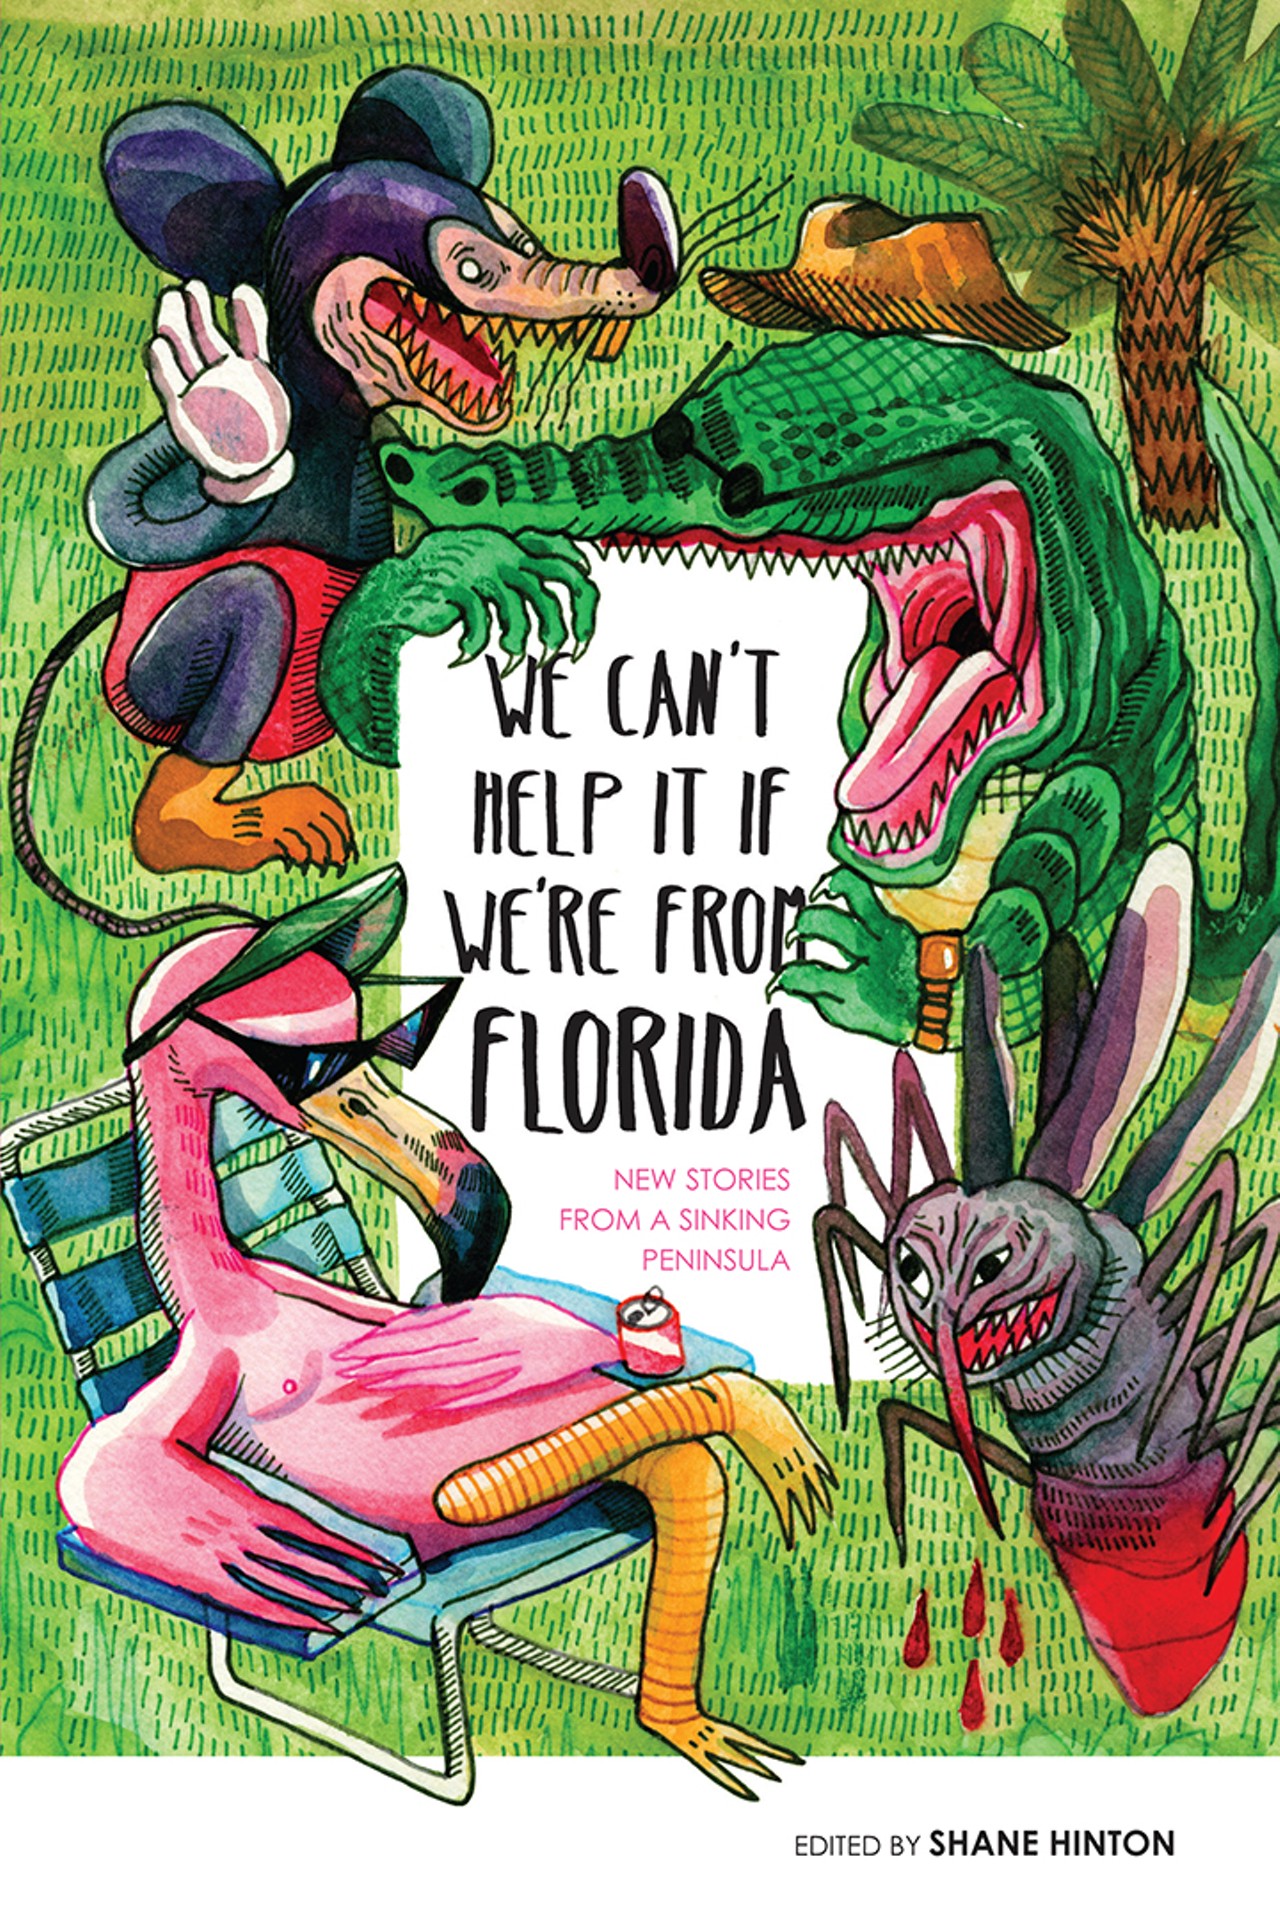 Wednesday, Nov. 29Burrow Press Presents: We Can't Help It if We're From Florida at the Orange Studio